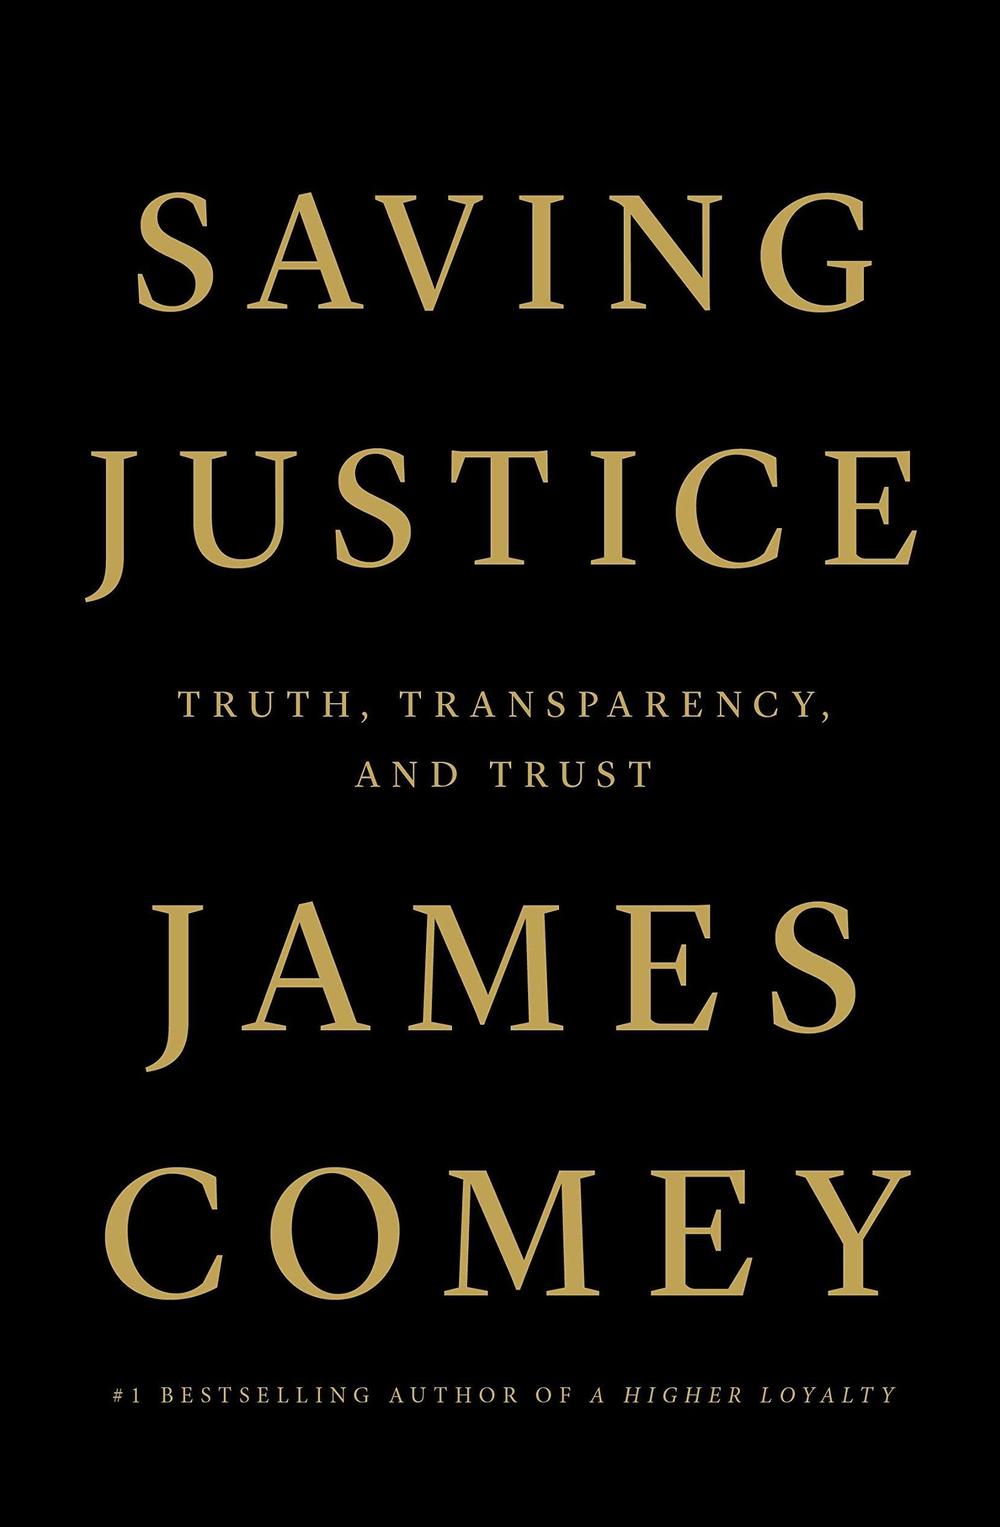 <em>Saving Justice: Truth, Transparency, and Trust,</em> by James Comey